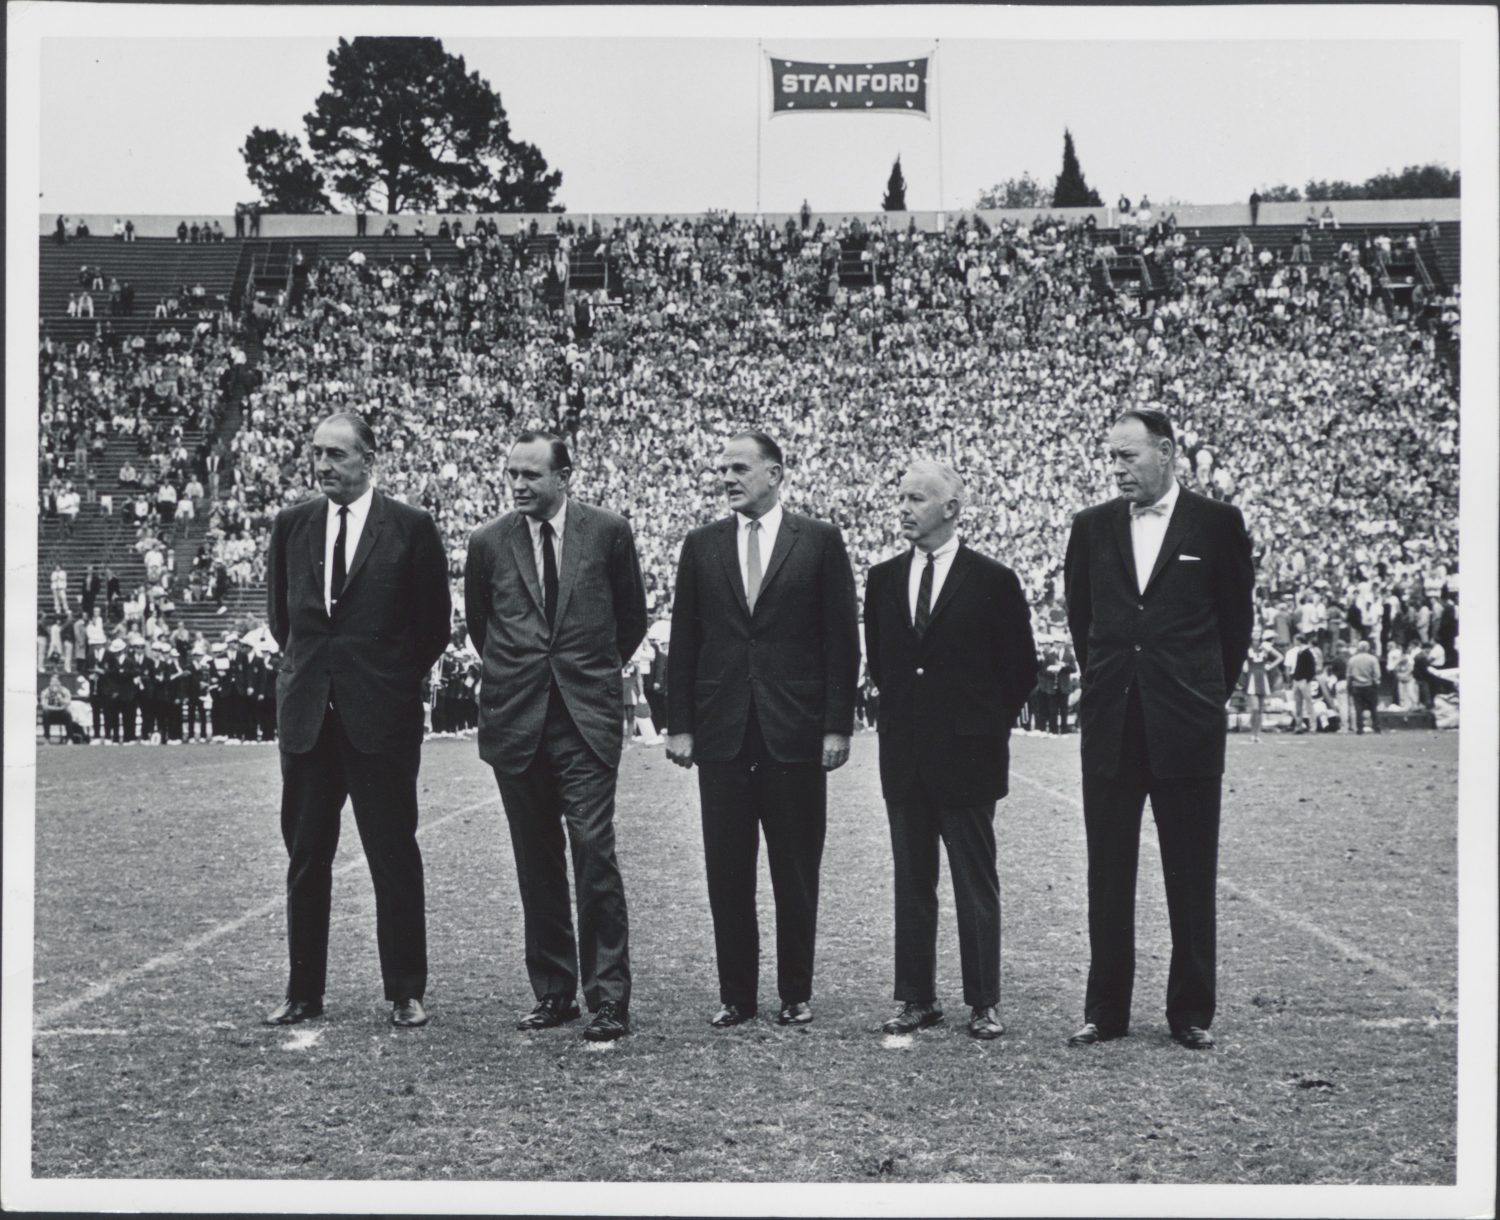 Dave Packard and his fellow inductees to the Sports Illustrated All-America football squad.